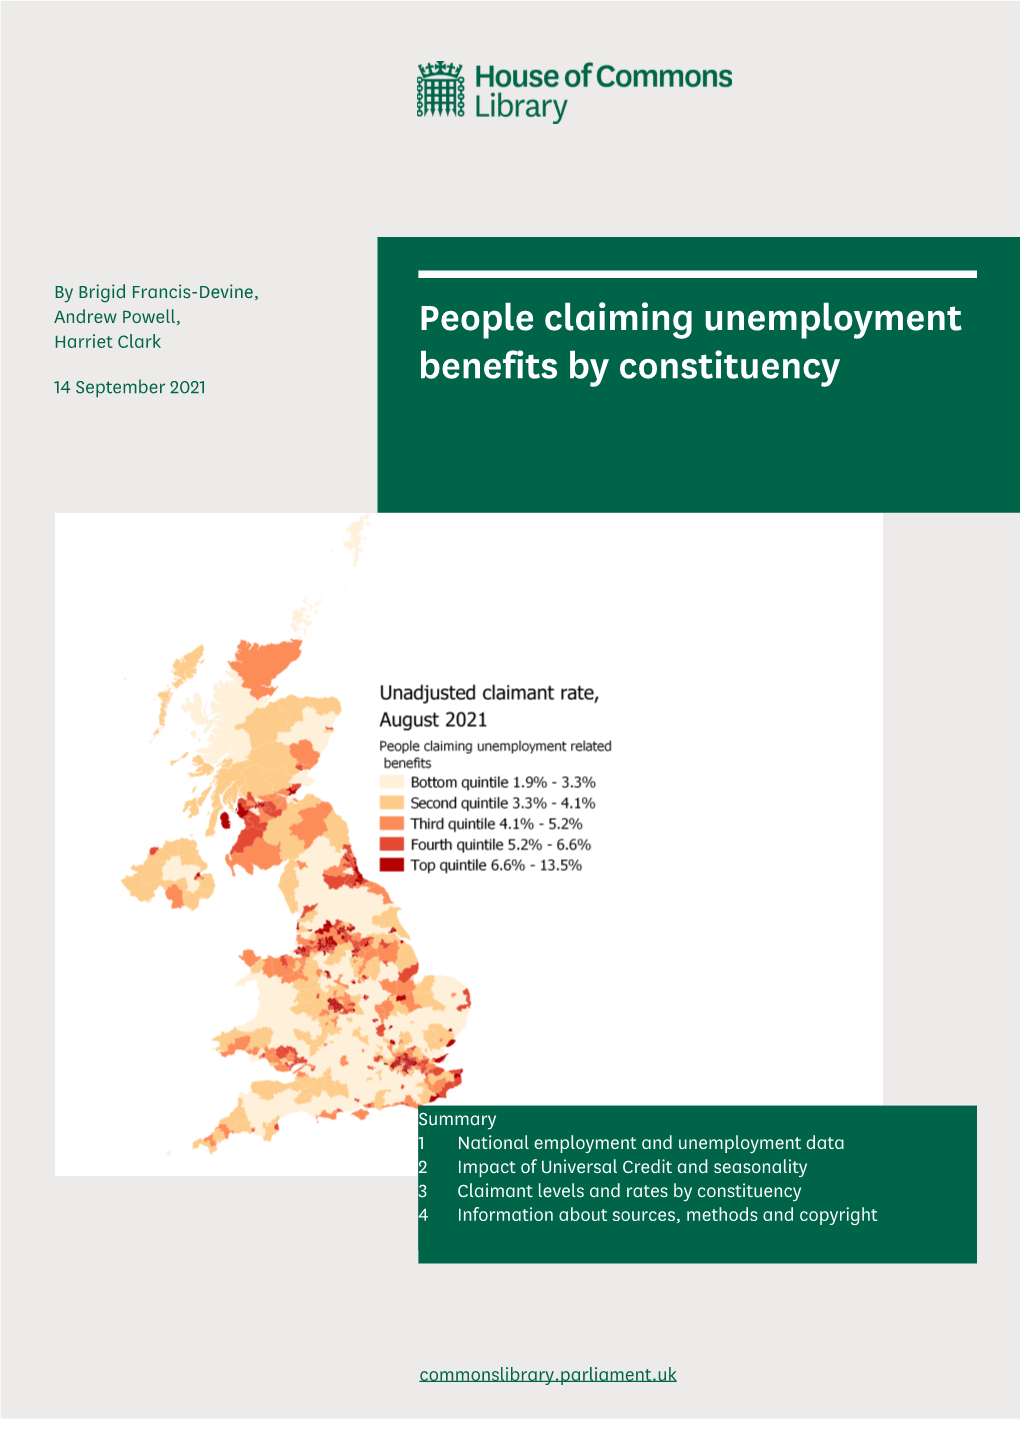 People Claiming Unemployment Benefits by Constituency